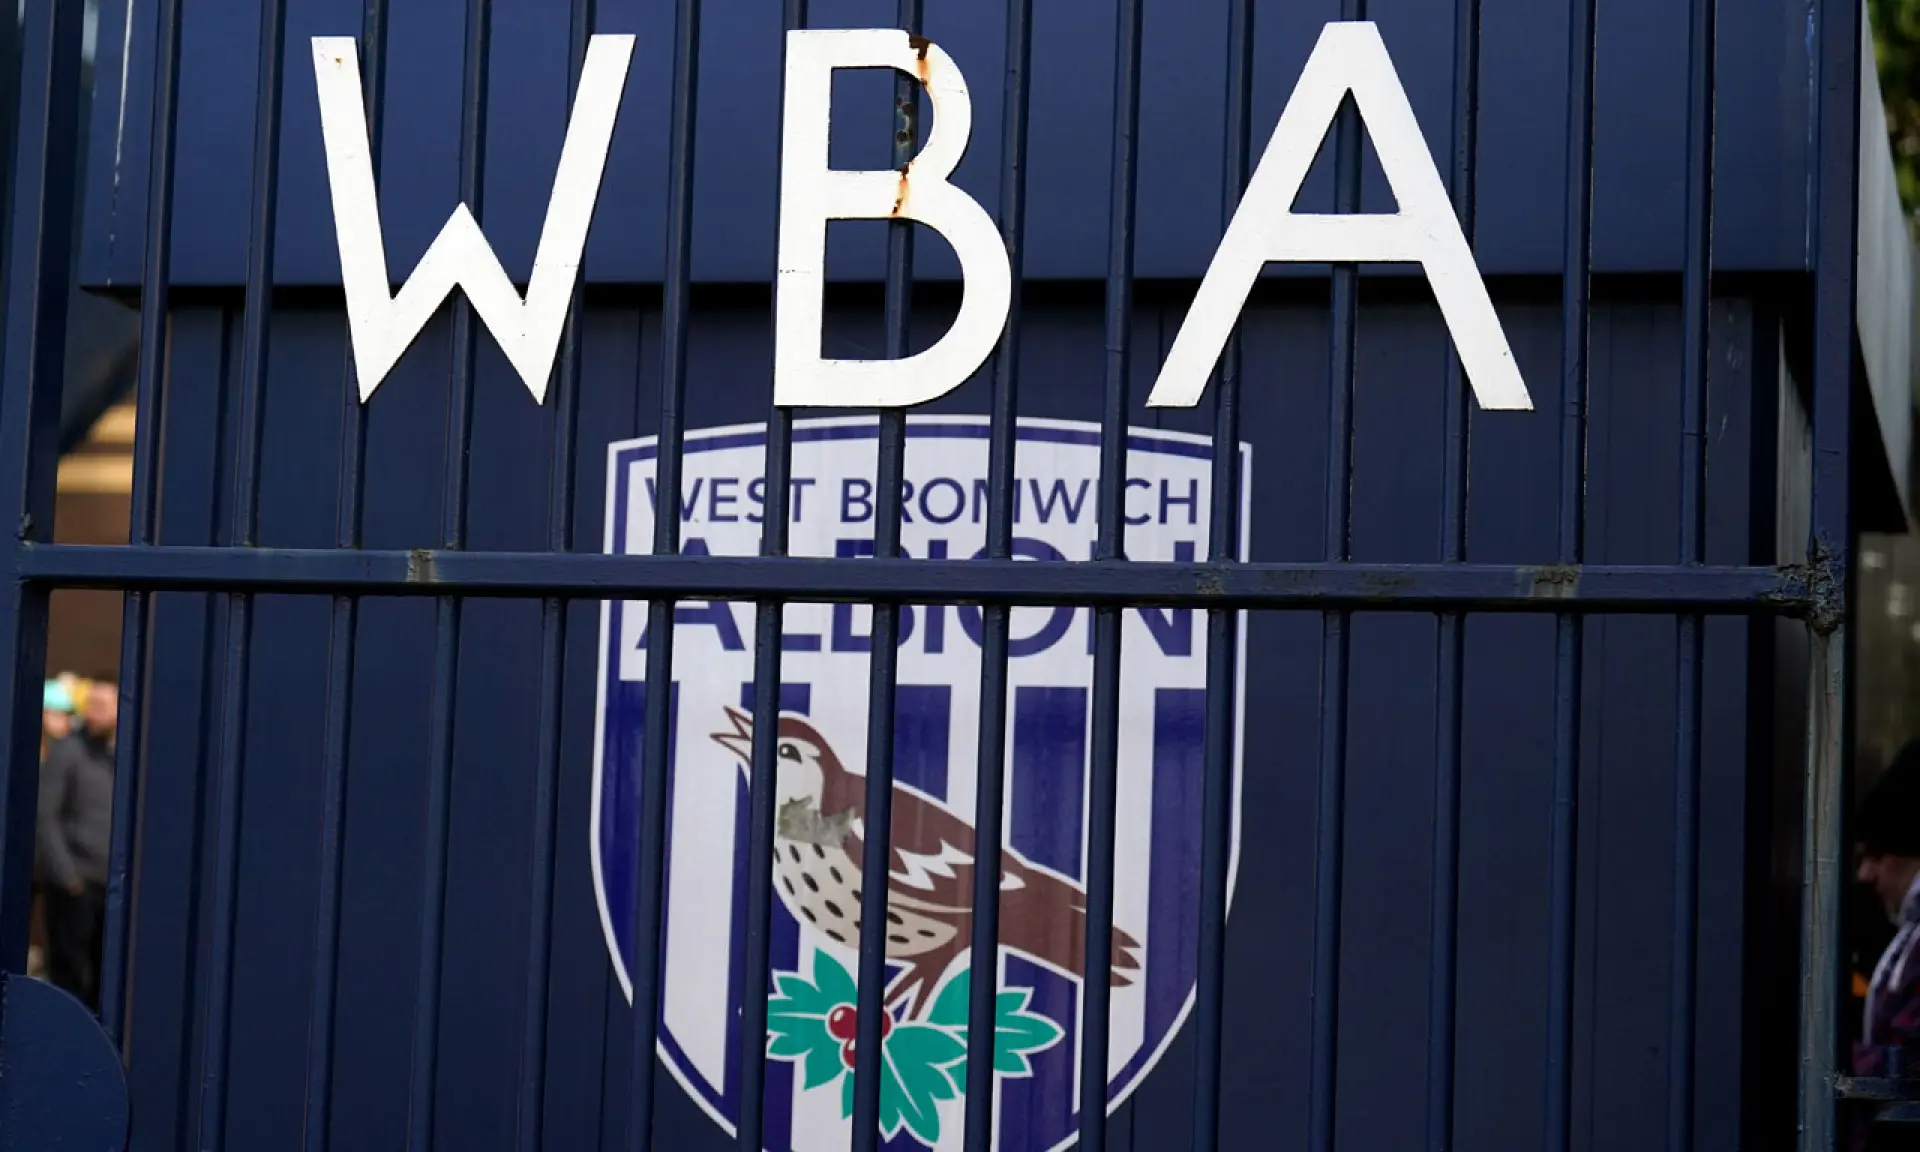 The Hawthorns, West Brom